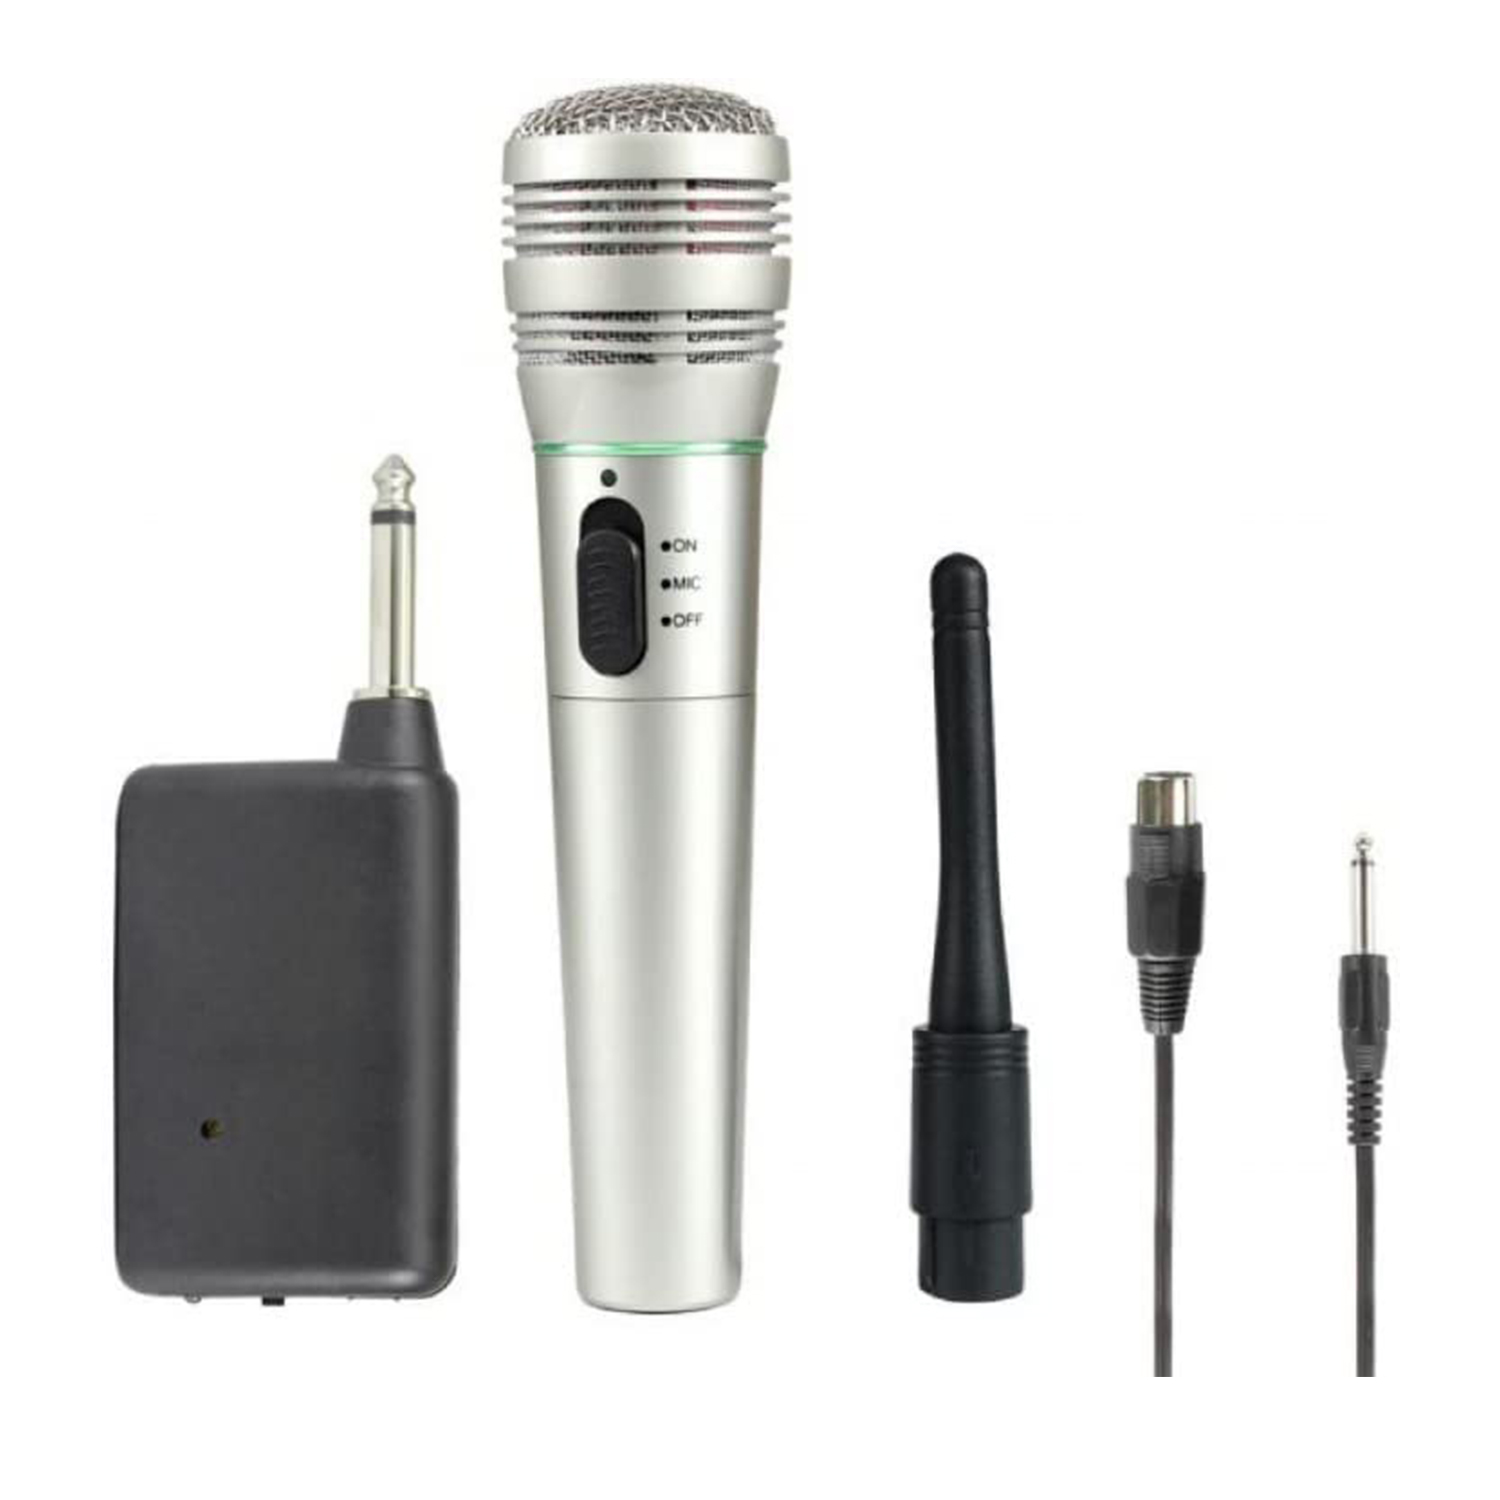 Kensonic KX308 Wireless Microphone or Wired Mic Both Options, Handheld Dynamic Mic System Set with Receiver (Silver)